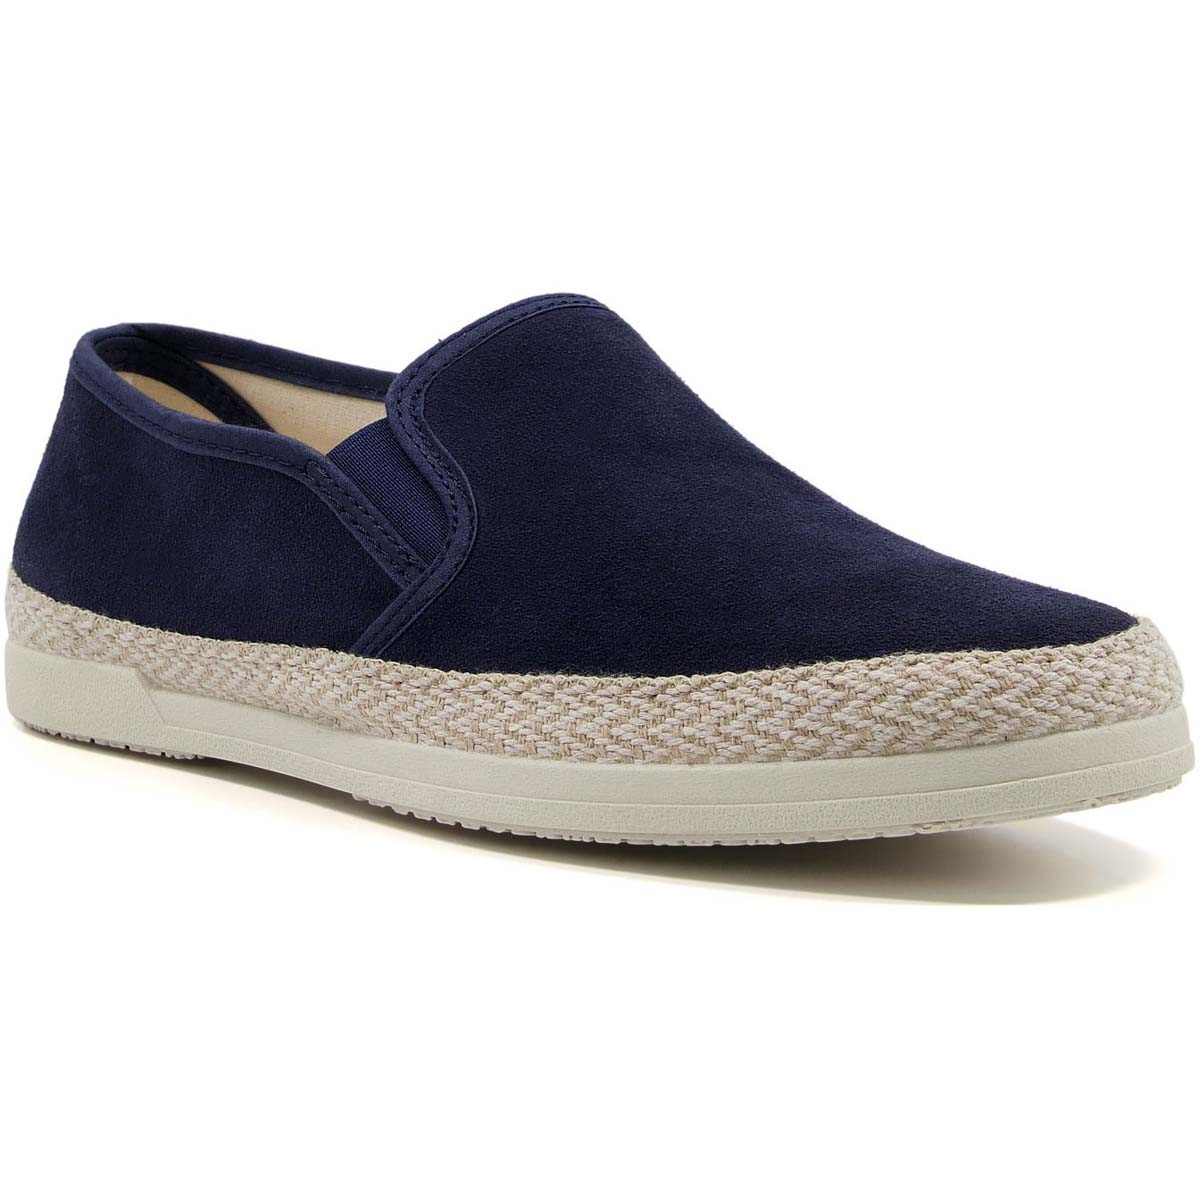 Dune London Francisco Navy Mens Slip-on Shoes 1427509020002 in a Plain Leather in Size 12